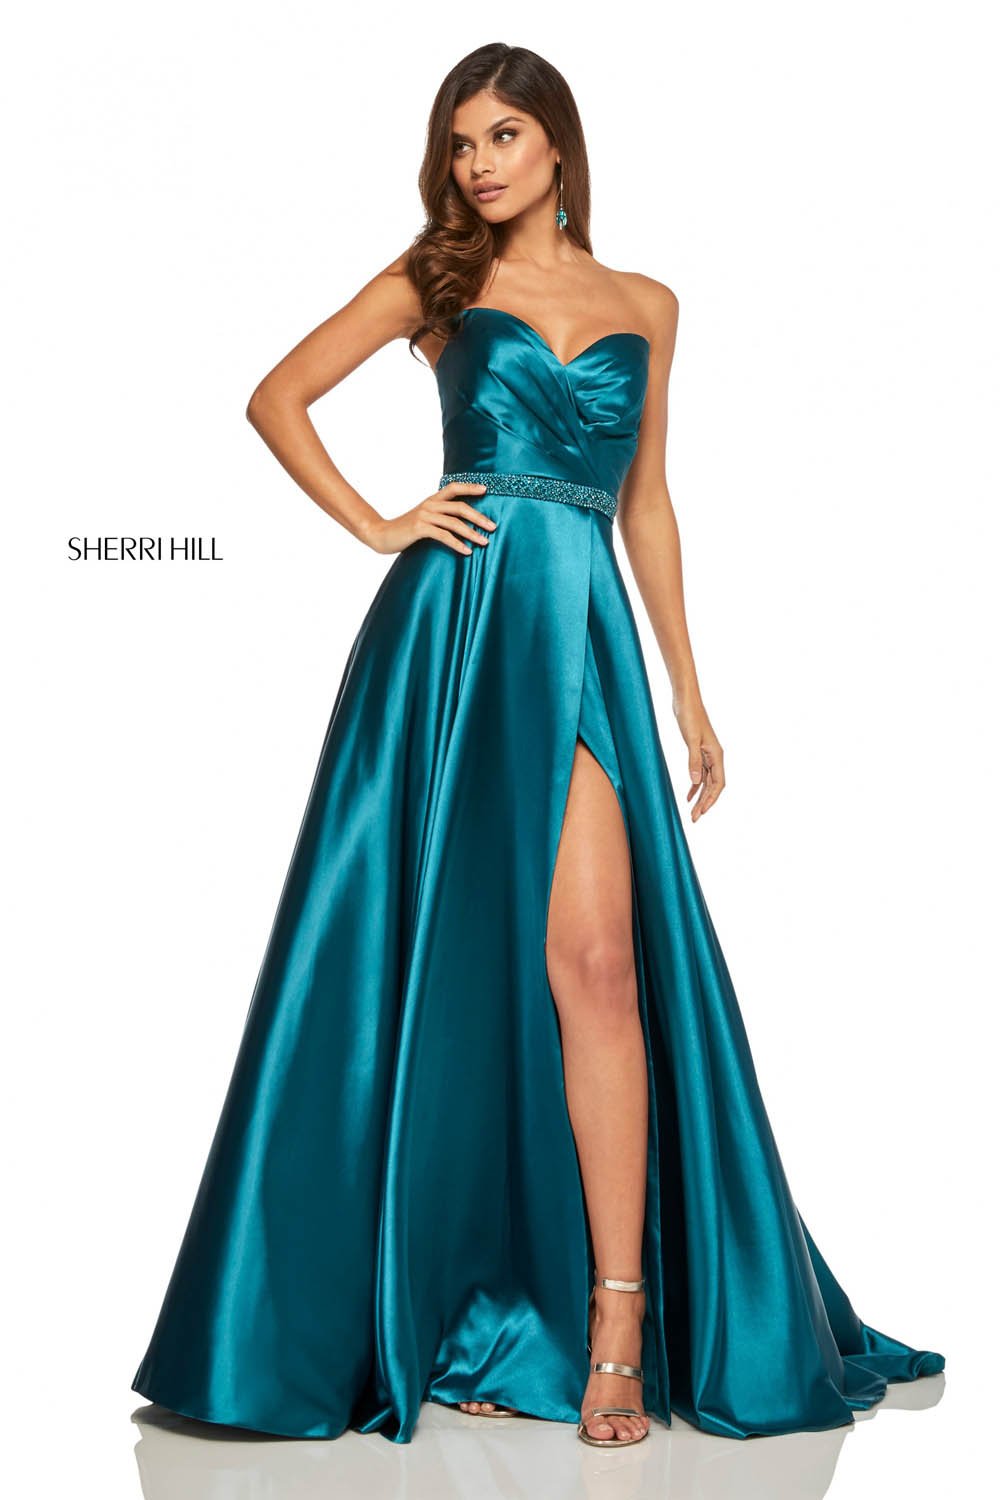 Sherri Hill 52415 dress images in these colors: Red, Teal, Mocha, Yellow, Purple, Plum, Royal, Emerald, Rose.